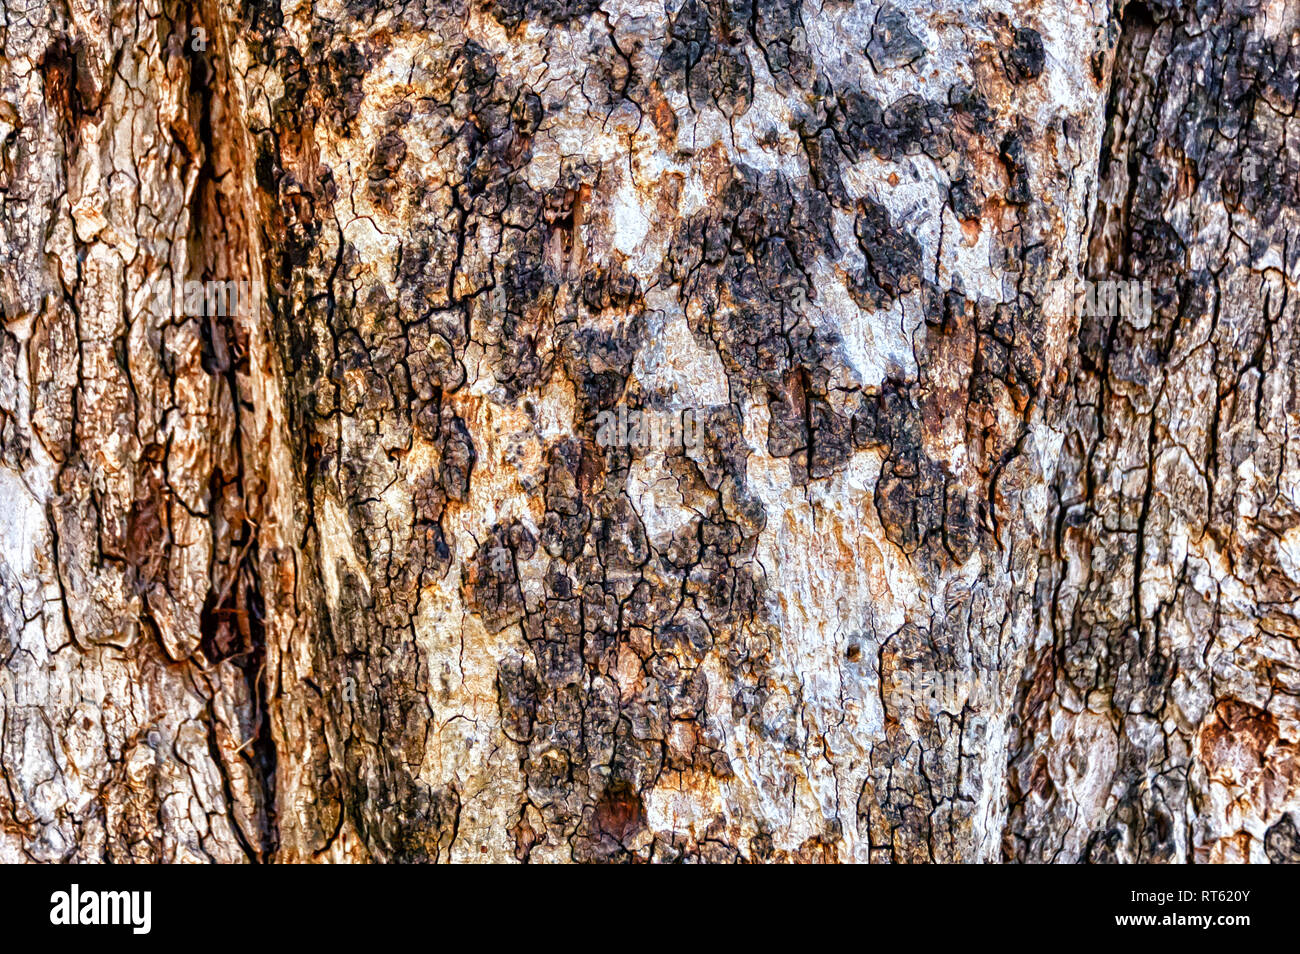 Close up of the bark and trunk of a peepal tree, Ficus religiosa, or sacred fig. It is of religious significance to Hinduism, Buddhism, and Jainism. Stock Photo